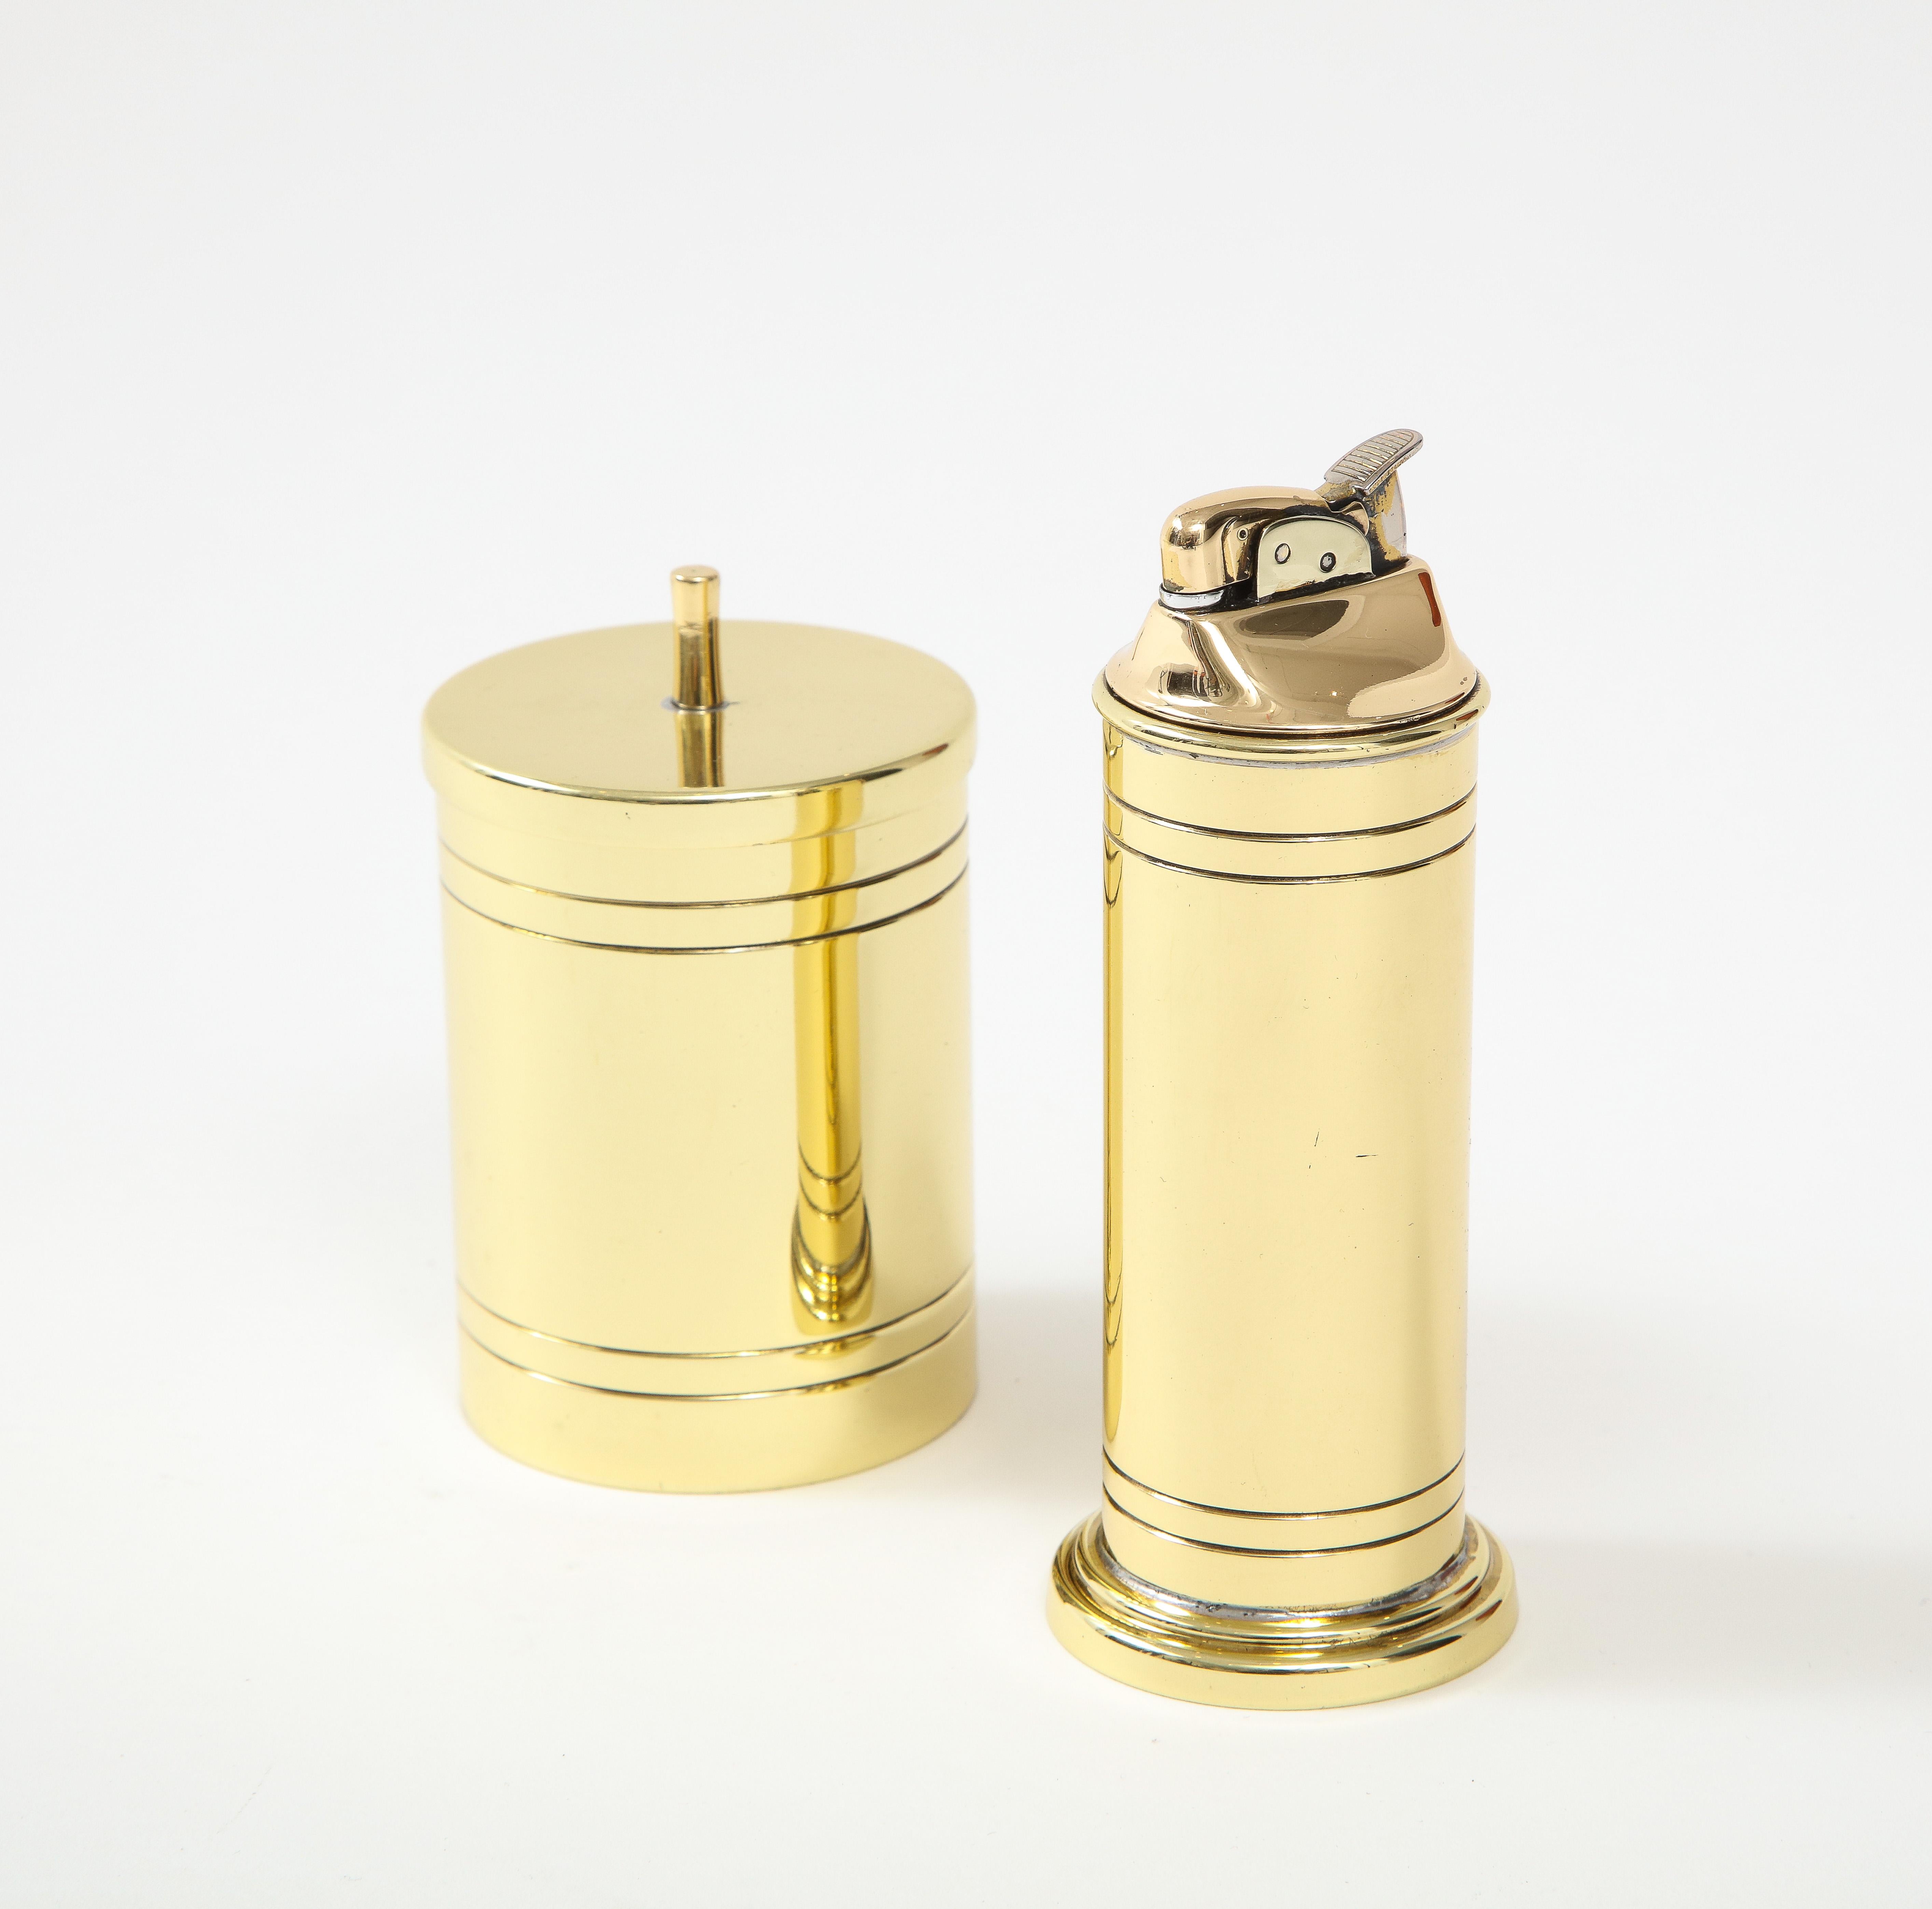 Seldom seen Tommi Parzinger brass smoking set includes brass lighter and cigarette/tobacco canister both with engine turned pinstripes. Signed. Lighter will need fluid and flint.

Lighter Measures 5.25